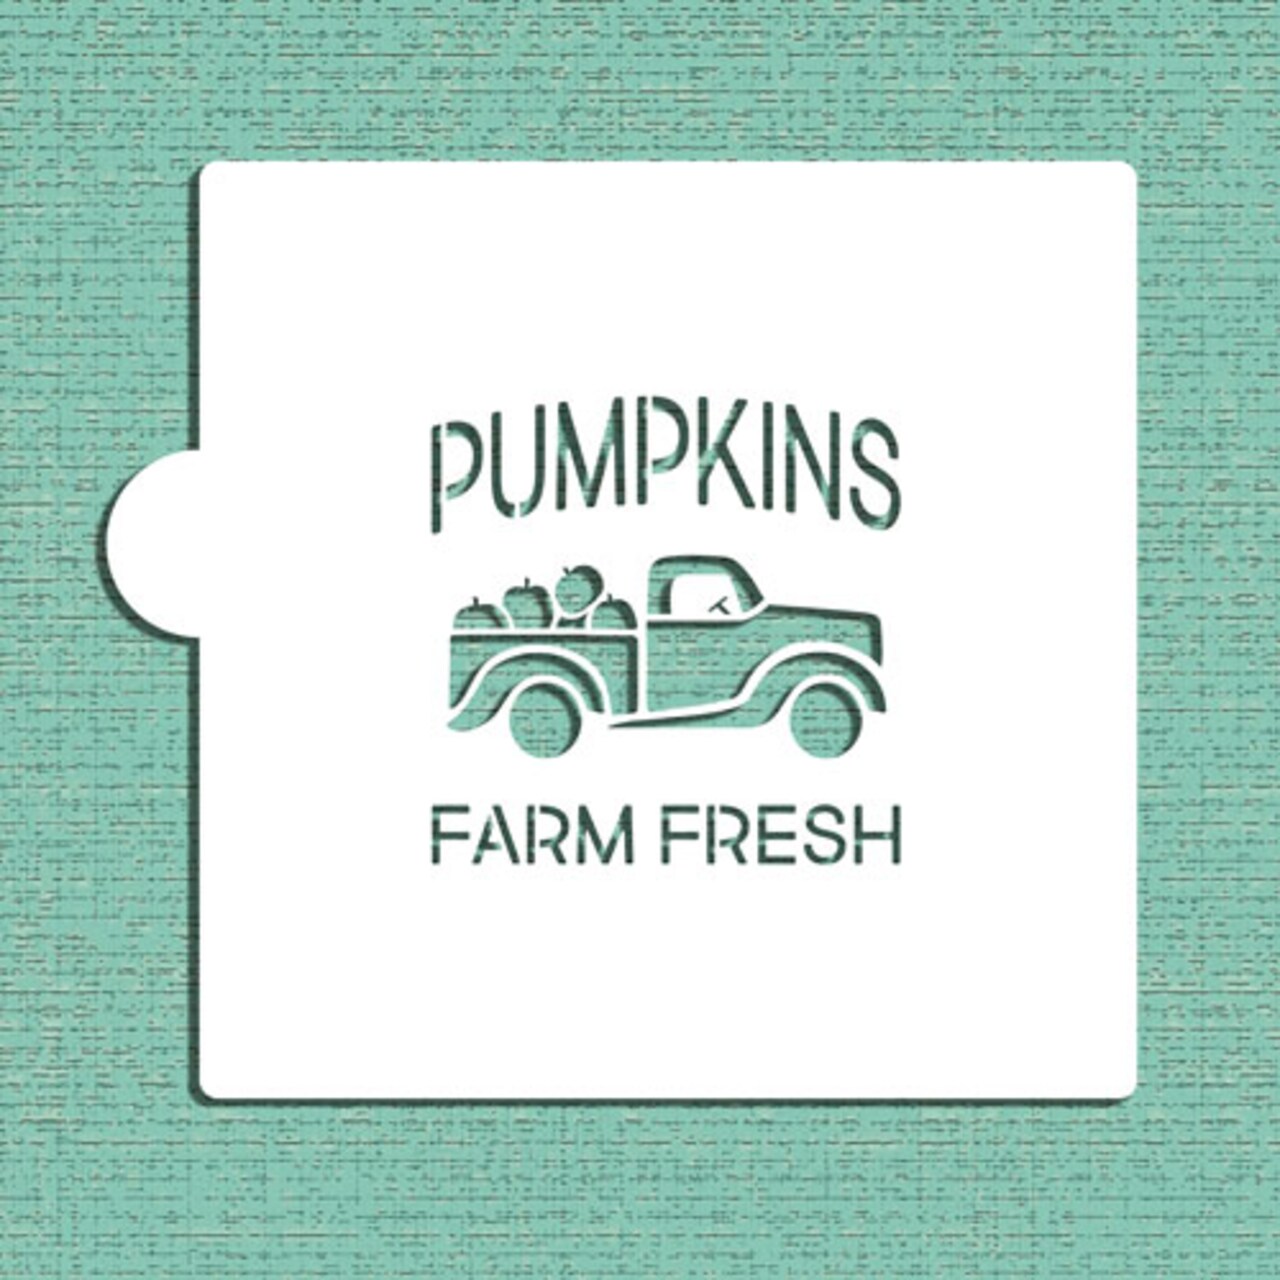 Vintage Pumpkin Truck Cookie &#x26; Craft Stencil | CM160 by Designer Stencils | Cookie Decorating Tools | Baking Stencils for Royal Icing, Airbrush, Dusting Powder | Craft Stencils for Canvas, Paper, Wood | Reusable Food Grade Stencil